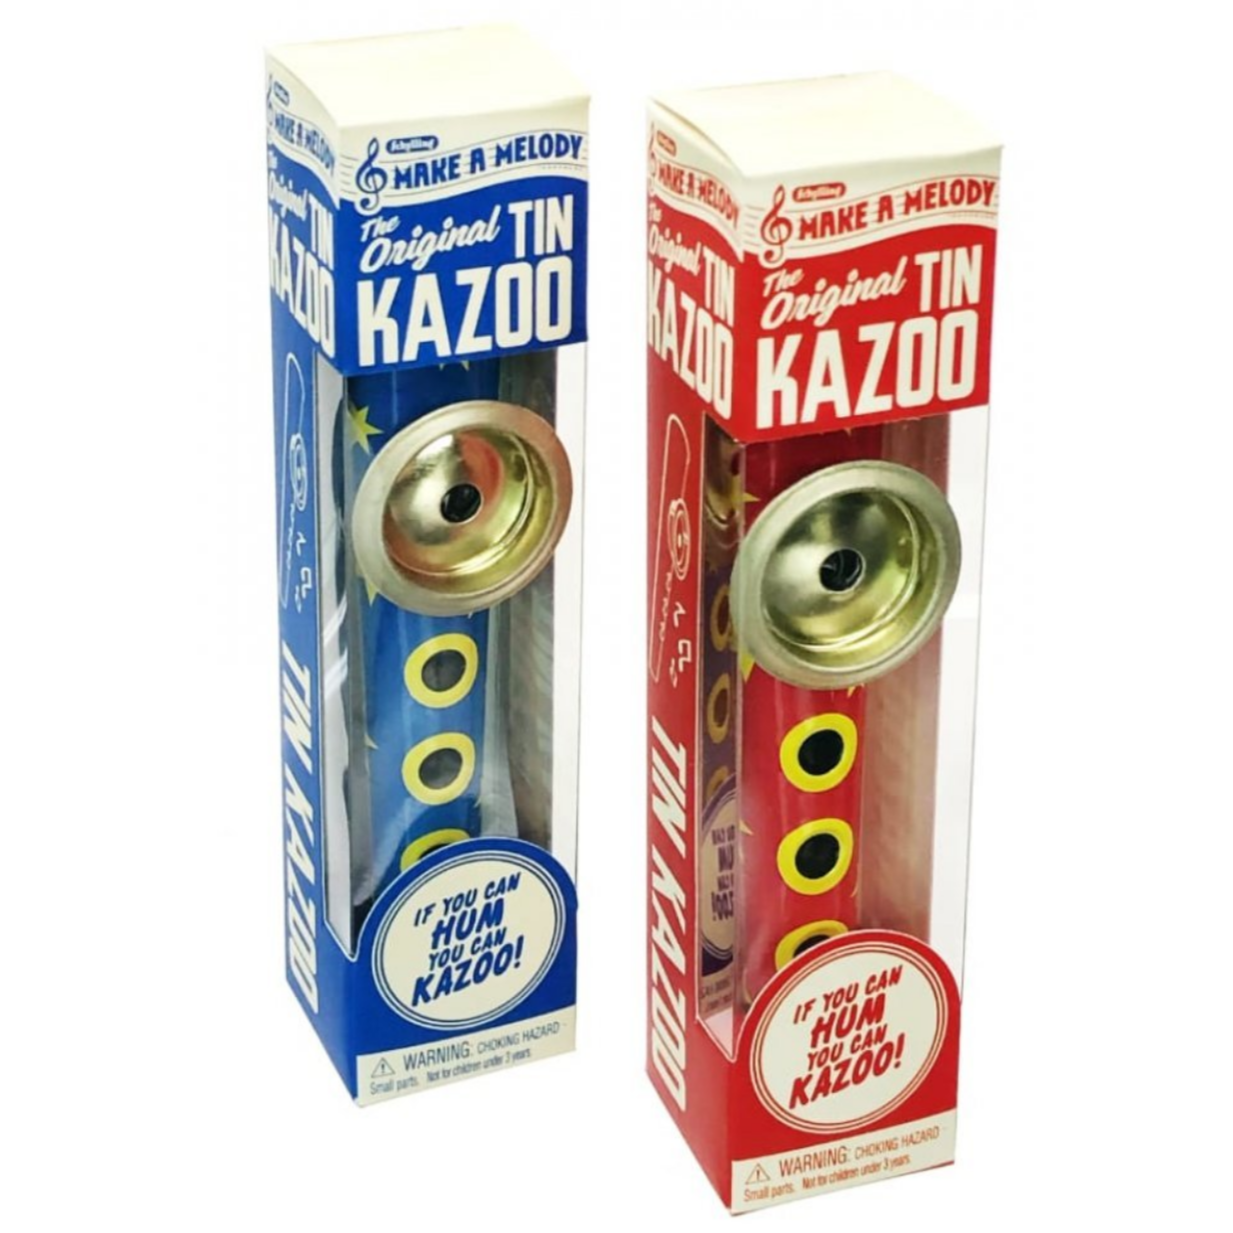 blue and red kazoo in packaging boxes